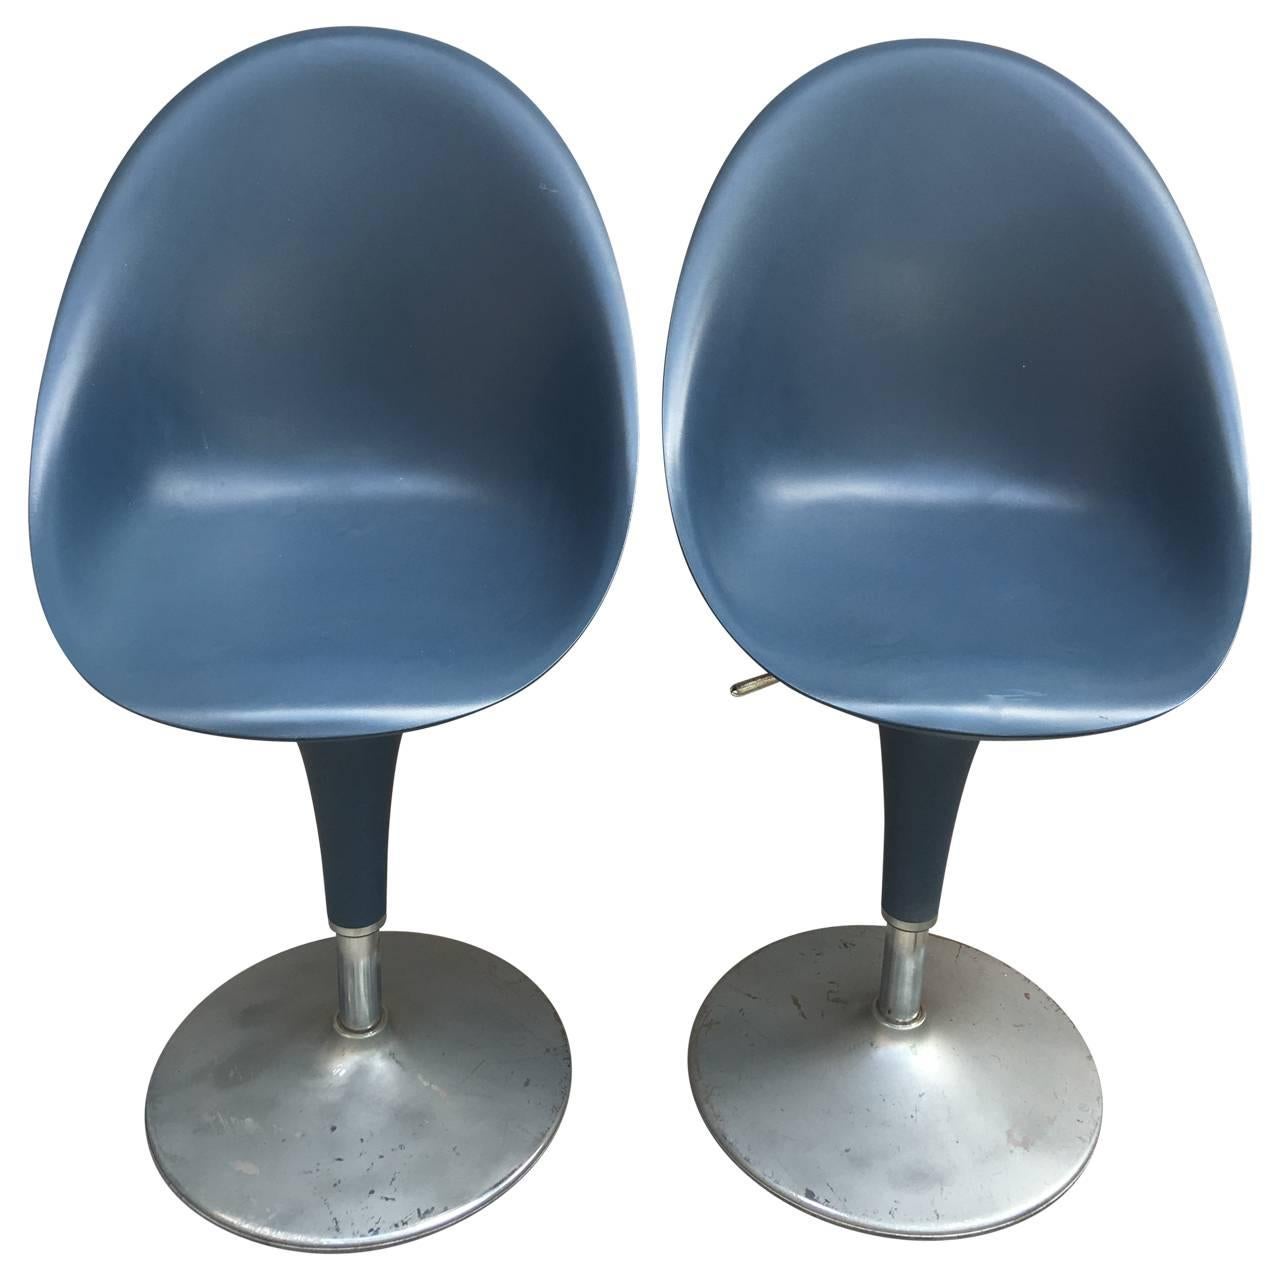 Two blue great looking Mid-Century chairs on aluminium base chairs. The seats adjusts up and down with the level handle under the seats.